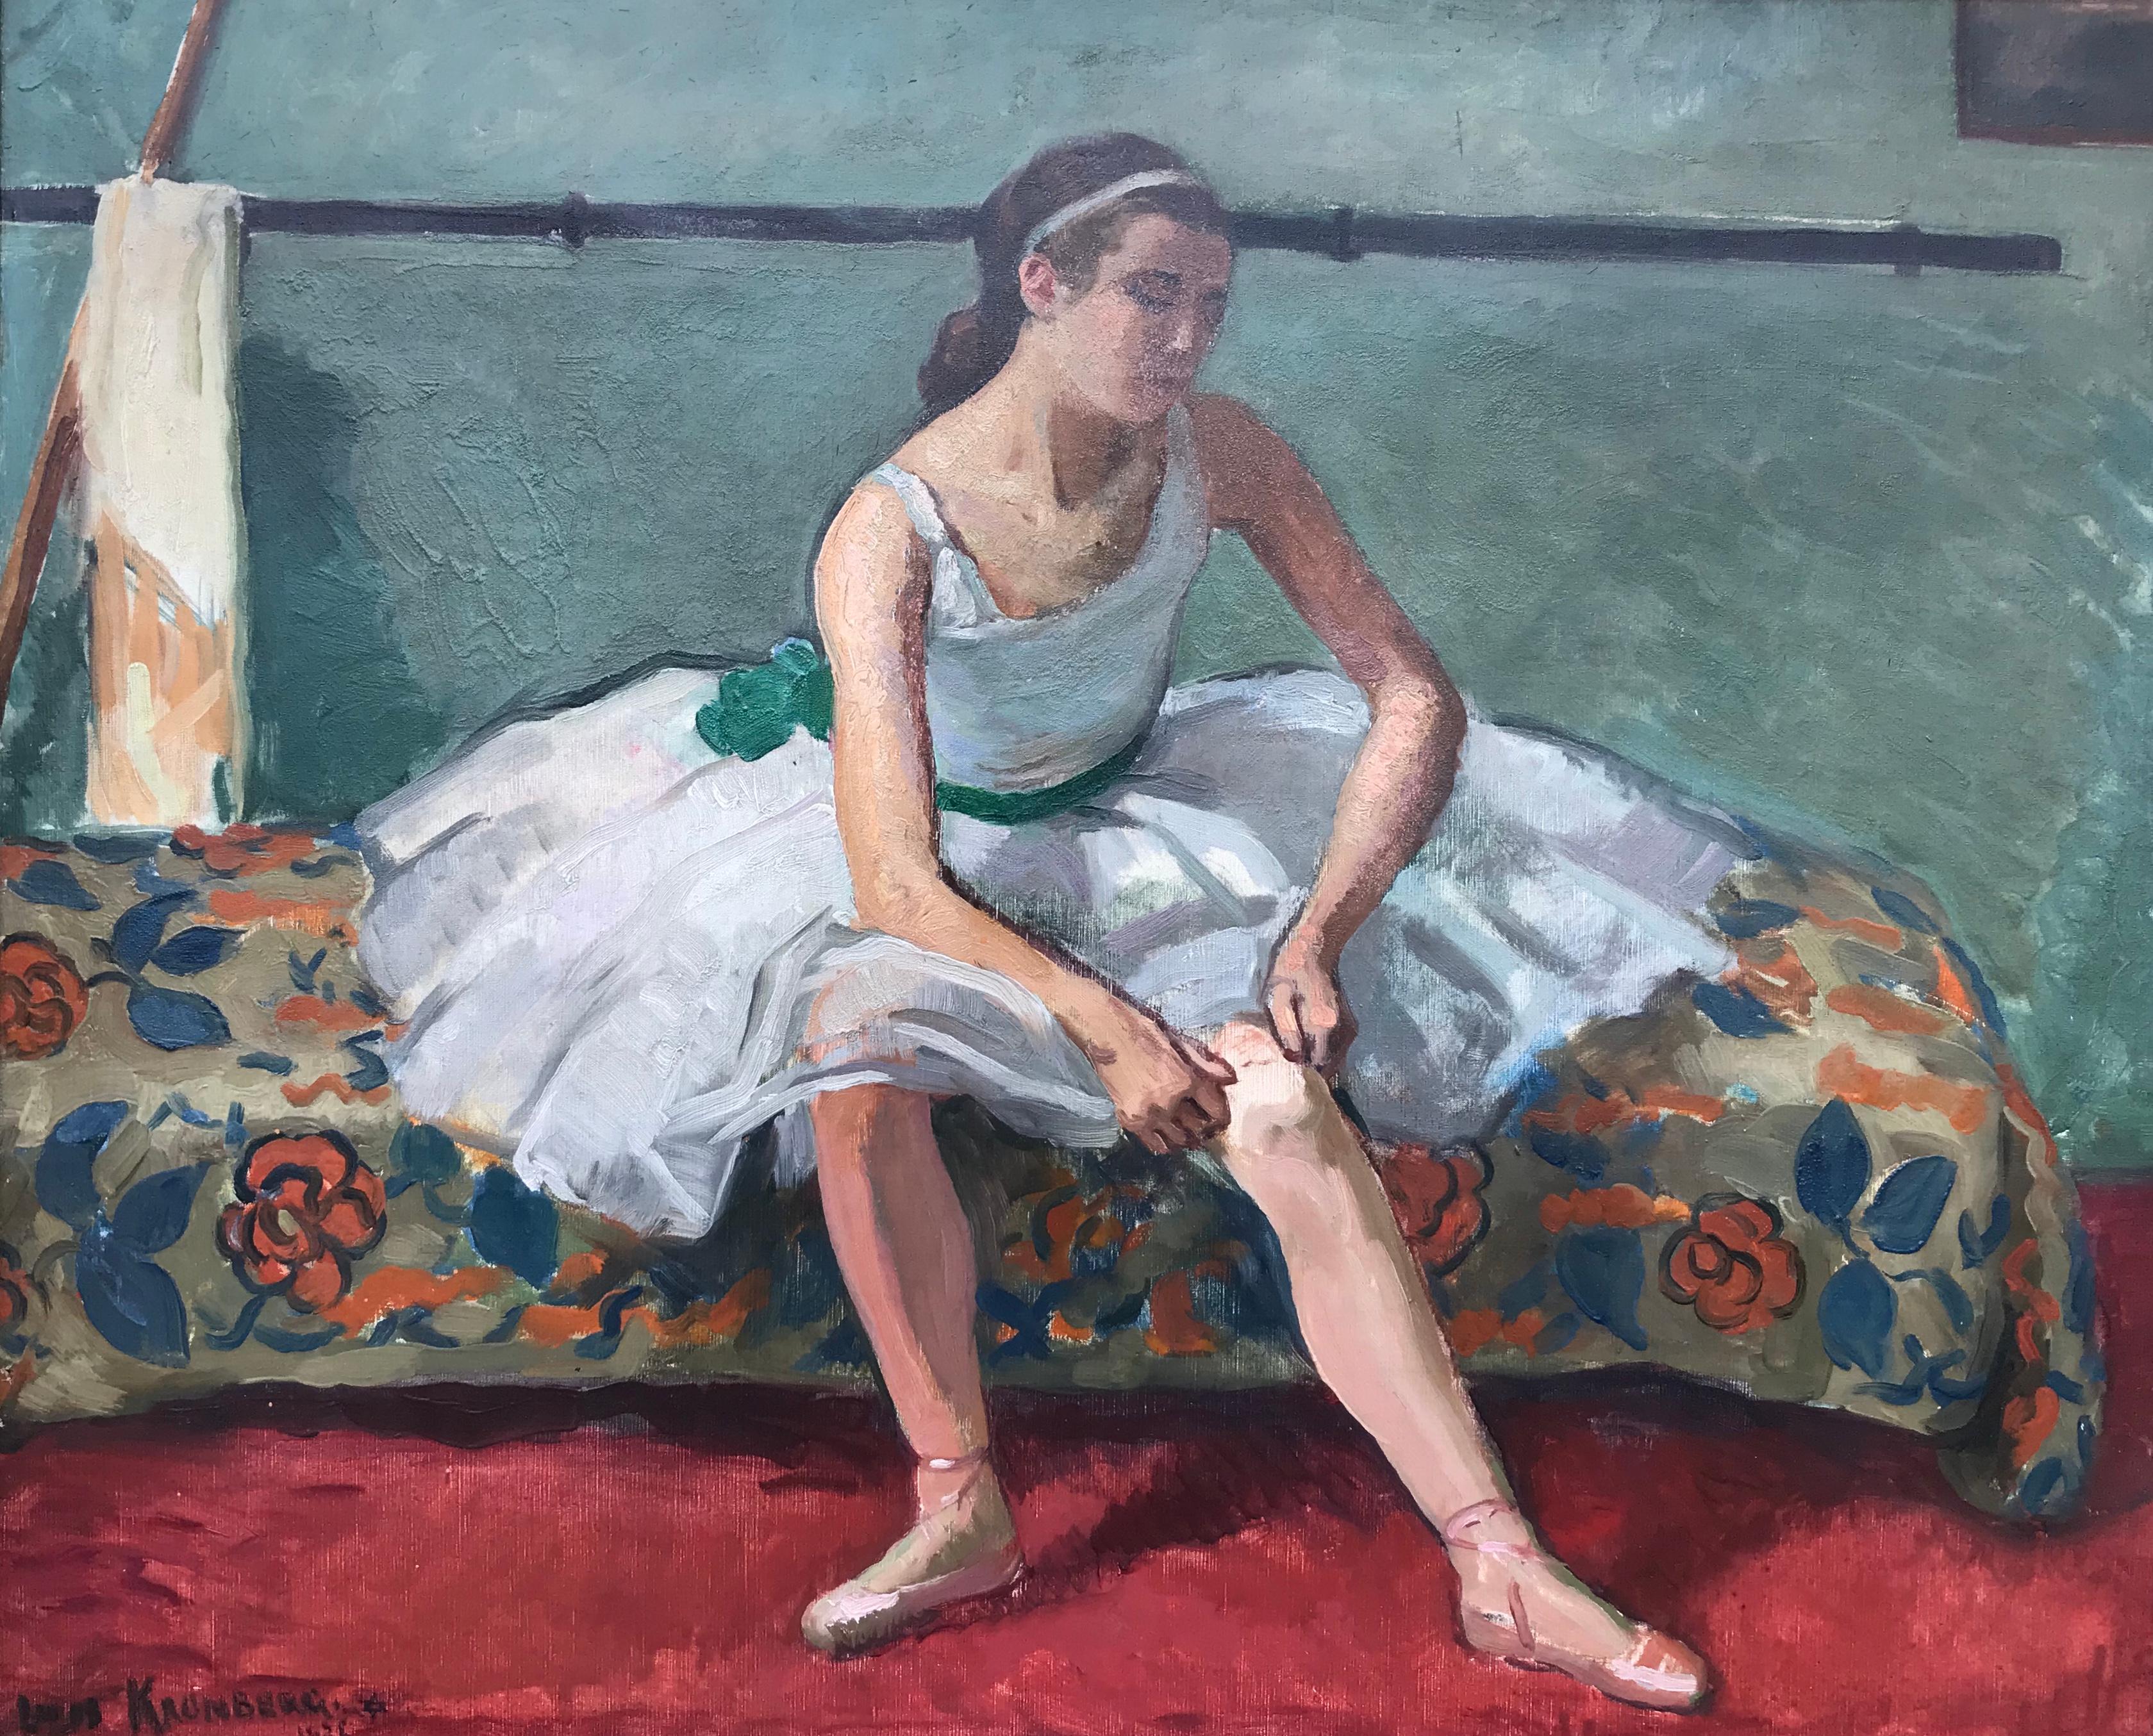 Louis Kronberg Figurative Painting - “Waiting for the Dance”